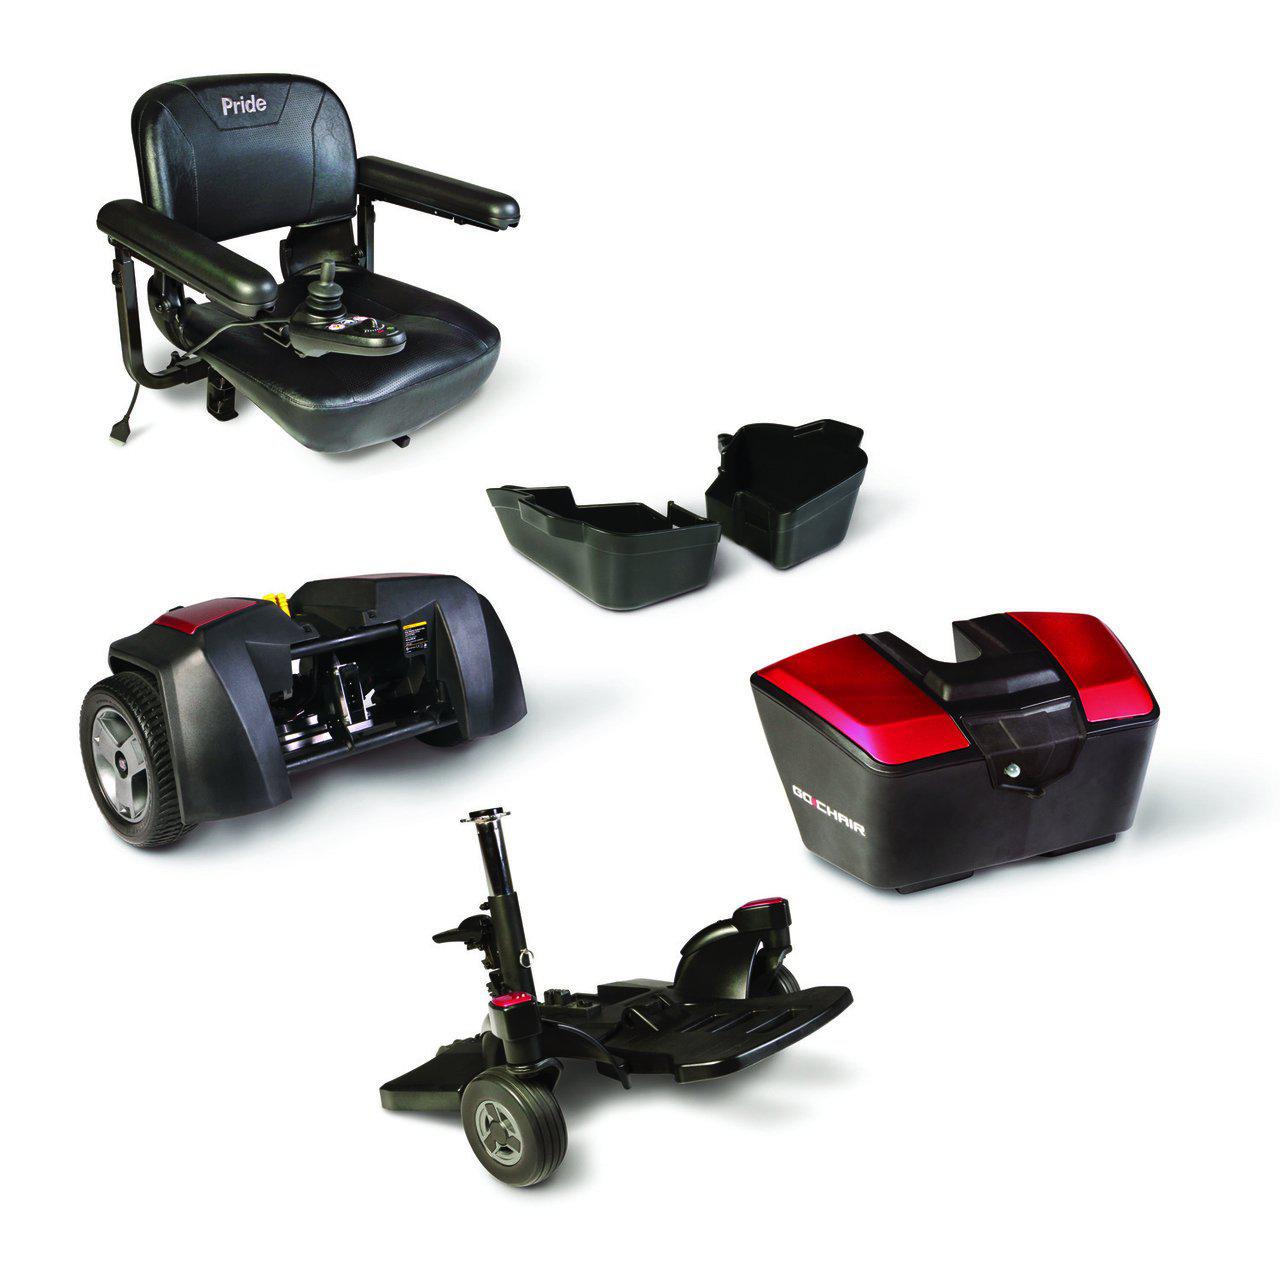 Pride Go-Chair Compact Power Chair components